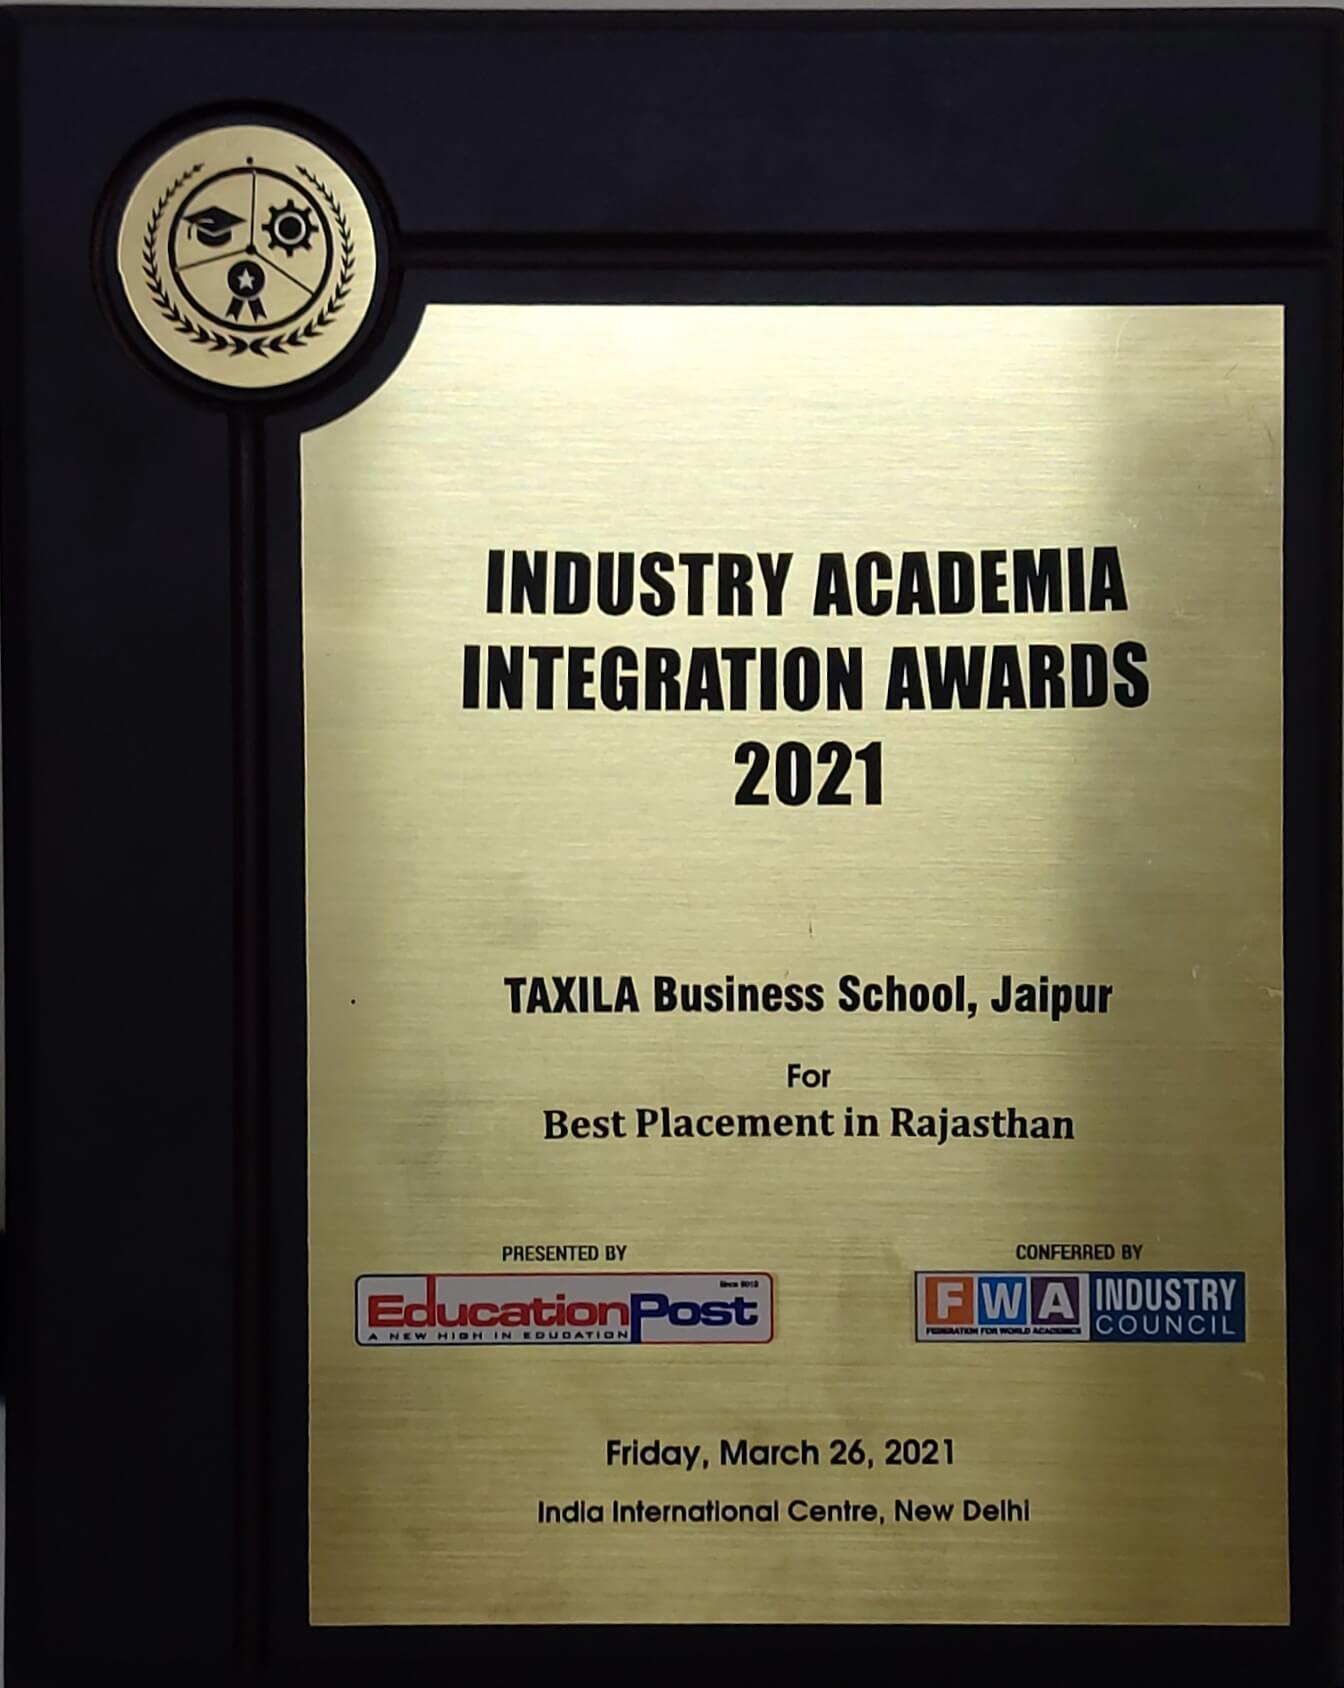 Taxila Business School Received Industry Academia Integration Award 2021 for Best Placement in Rajasthan